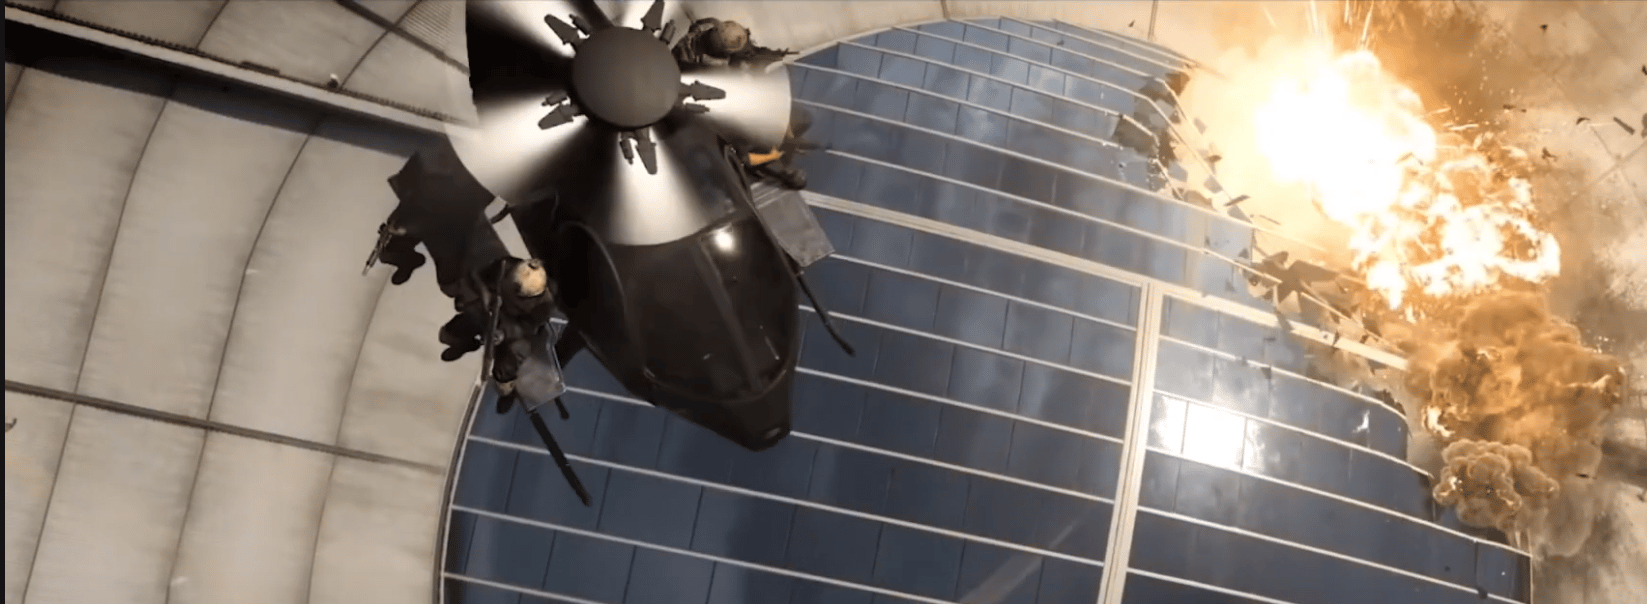 Call of Duty Warzone helicopter